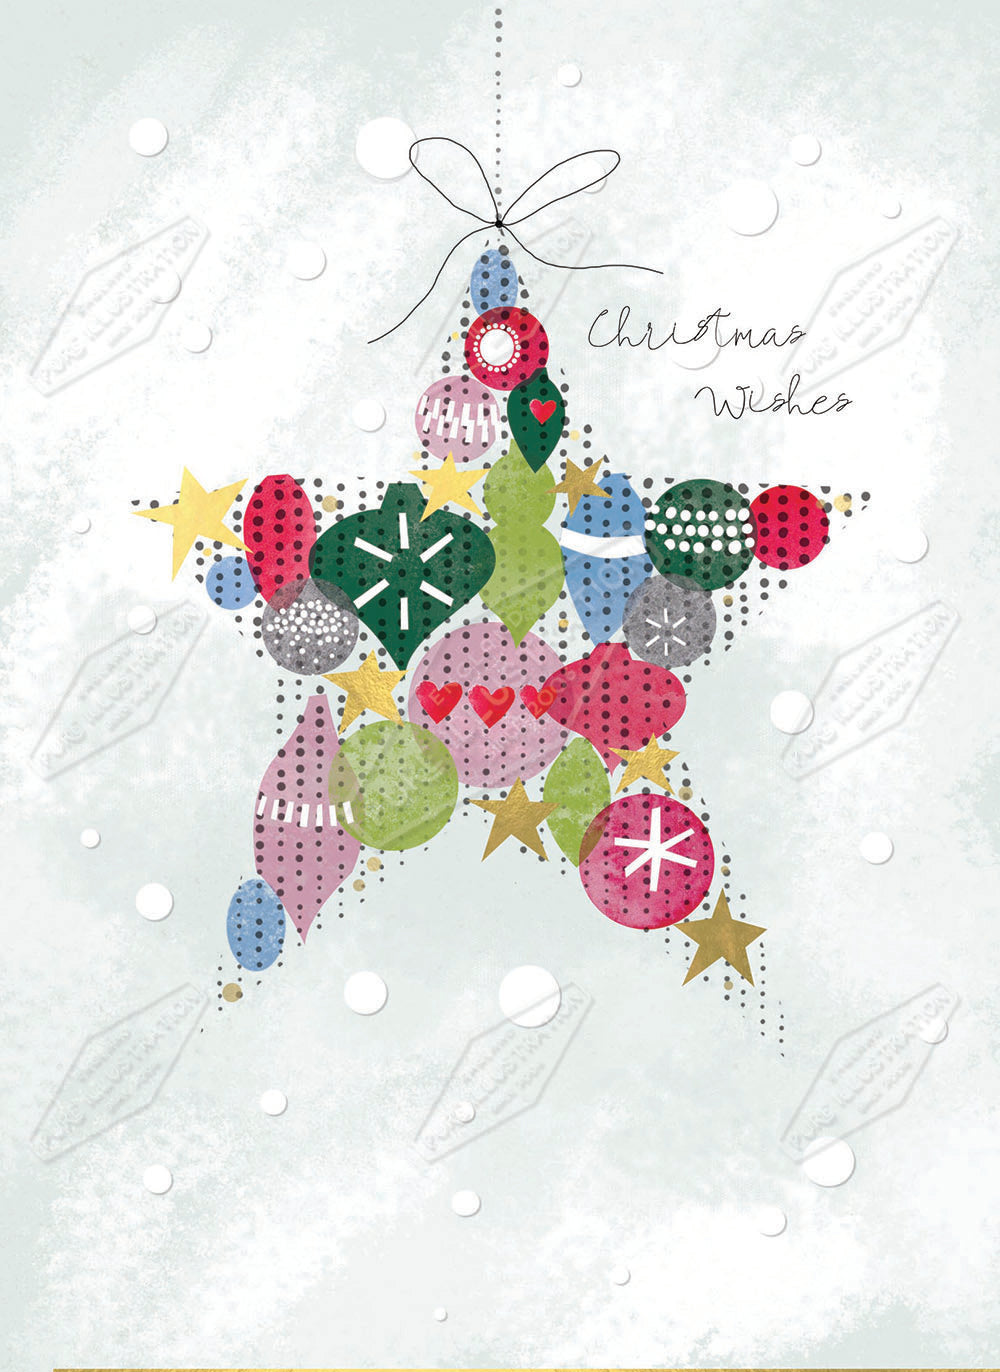 00033576SLA- Sarah Lake is represented by Pure Art Licensing Agency - Christmas Greeting Card Design